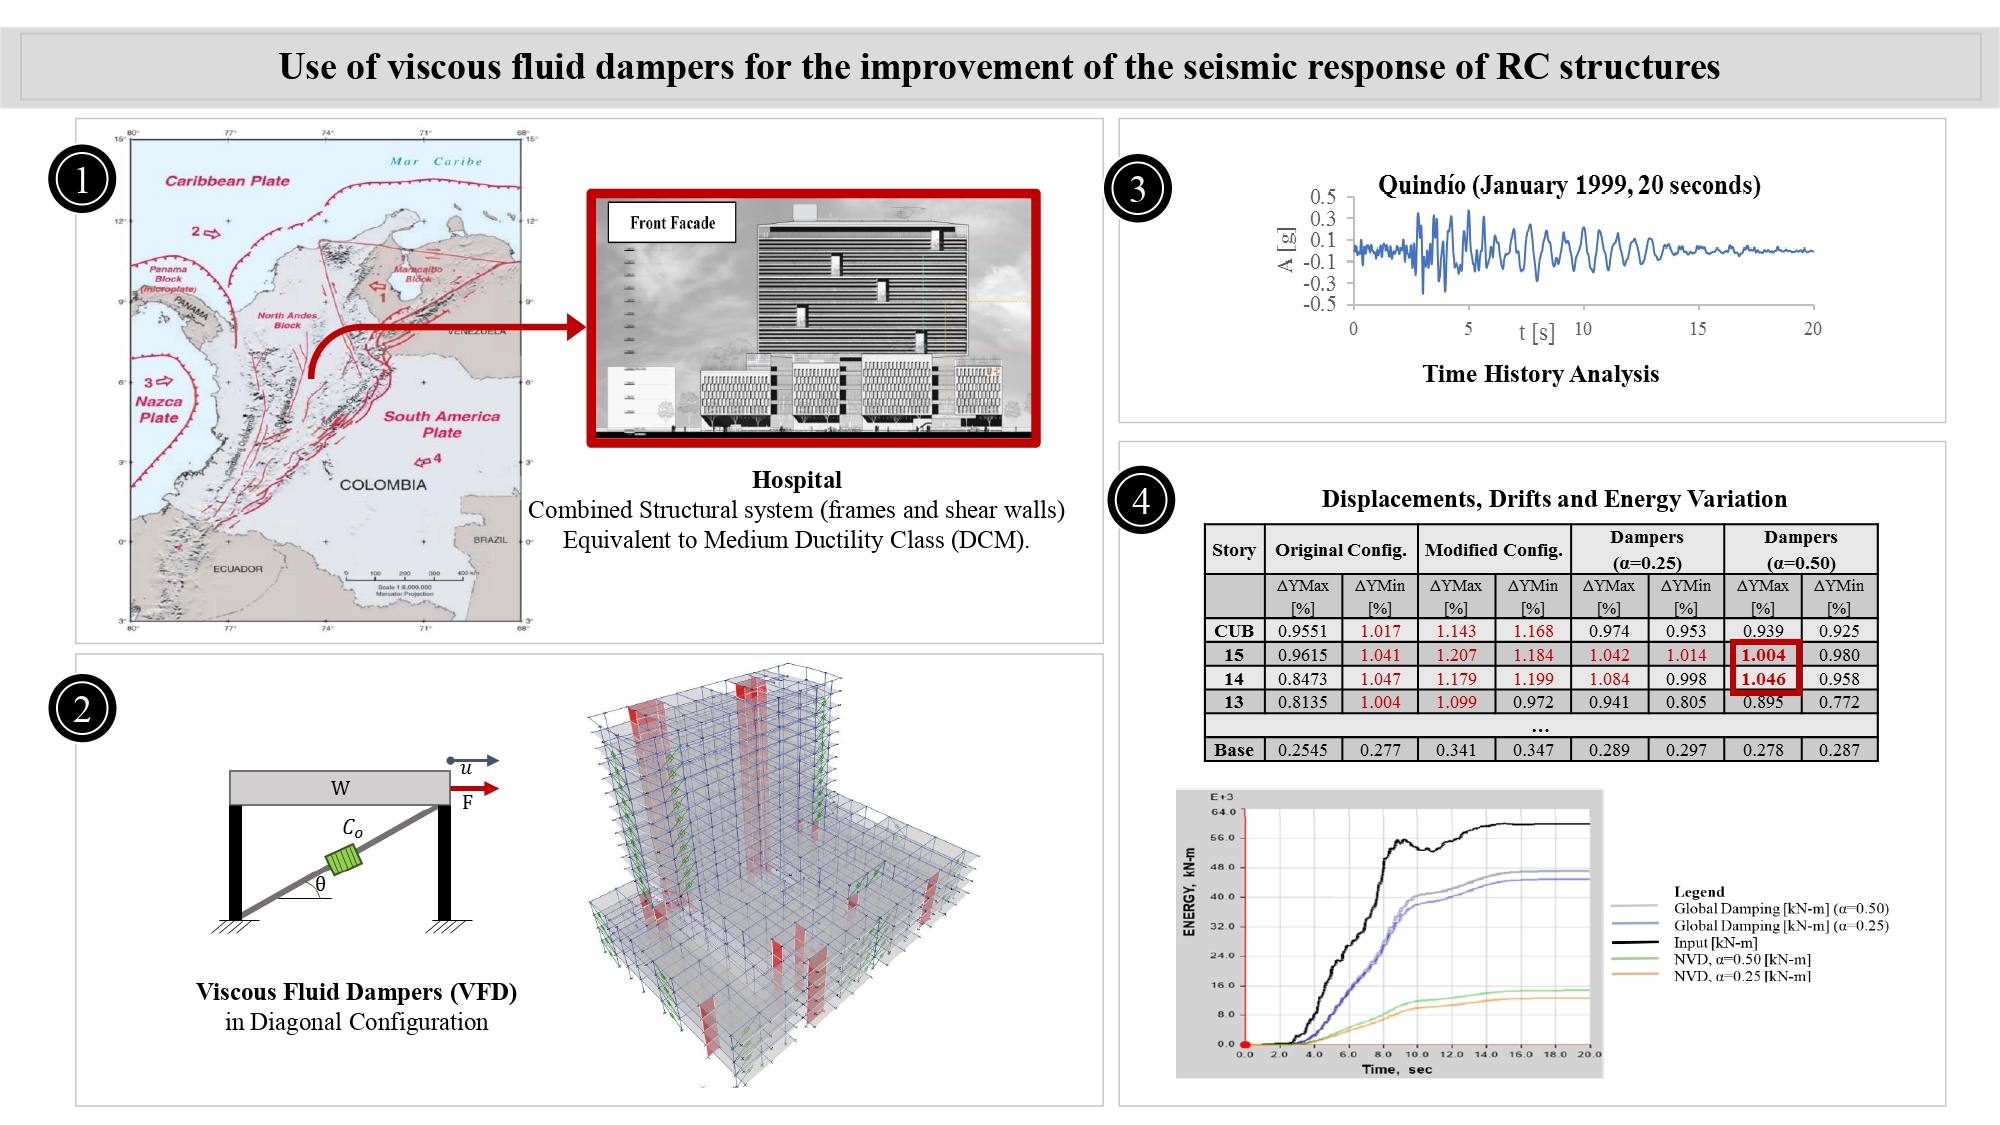 Use of viscous fluid dampers for the improvement of the seismic response of RC structures